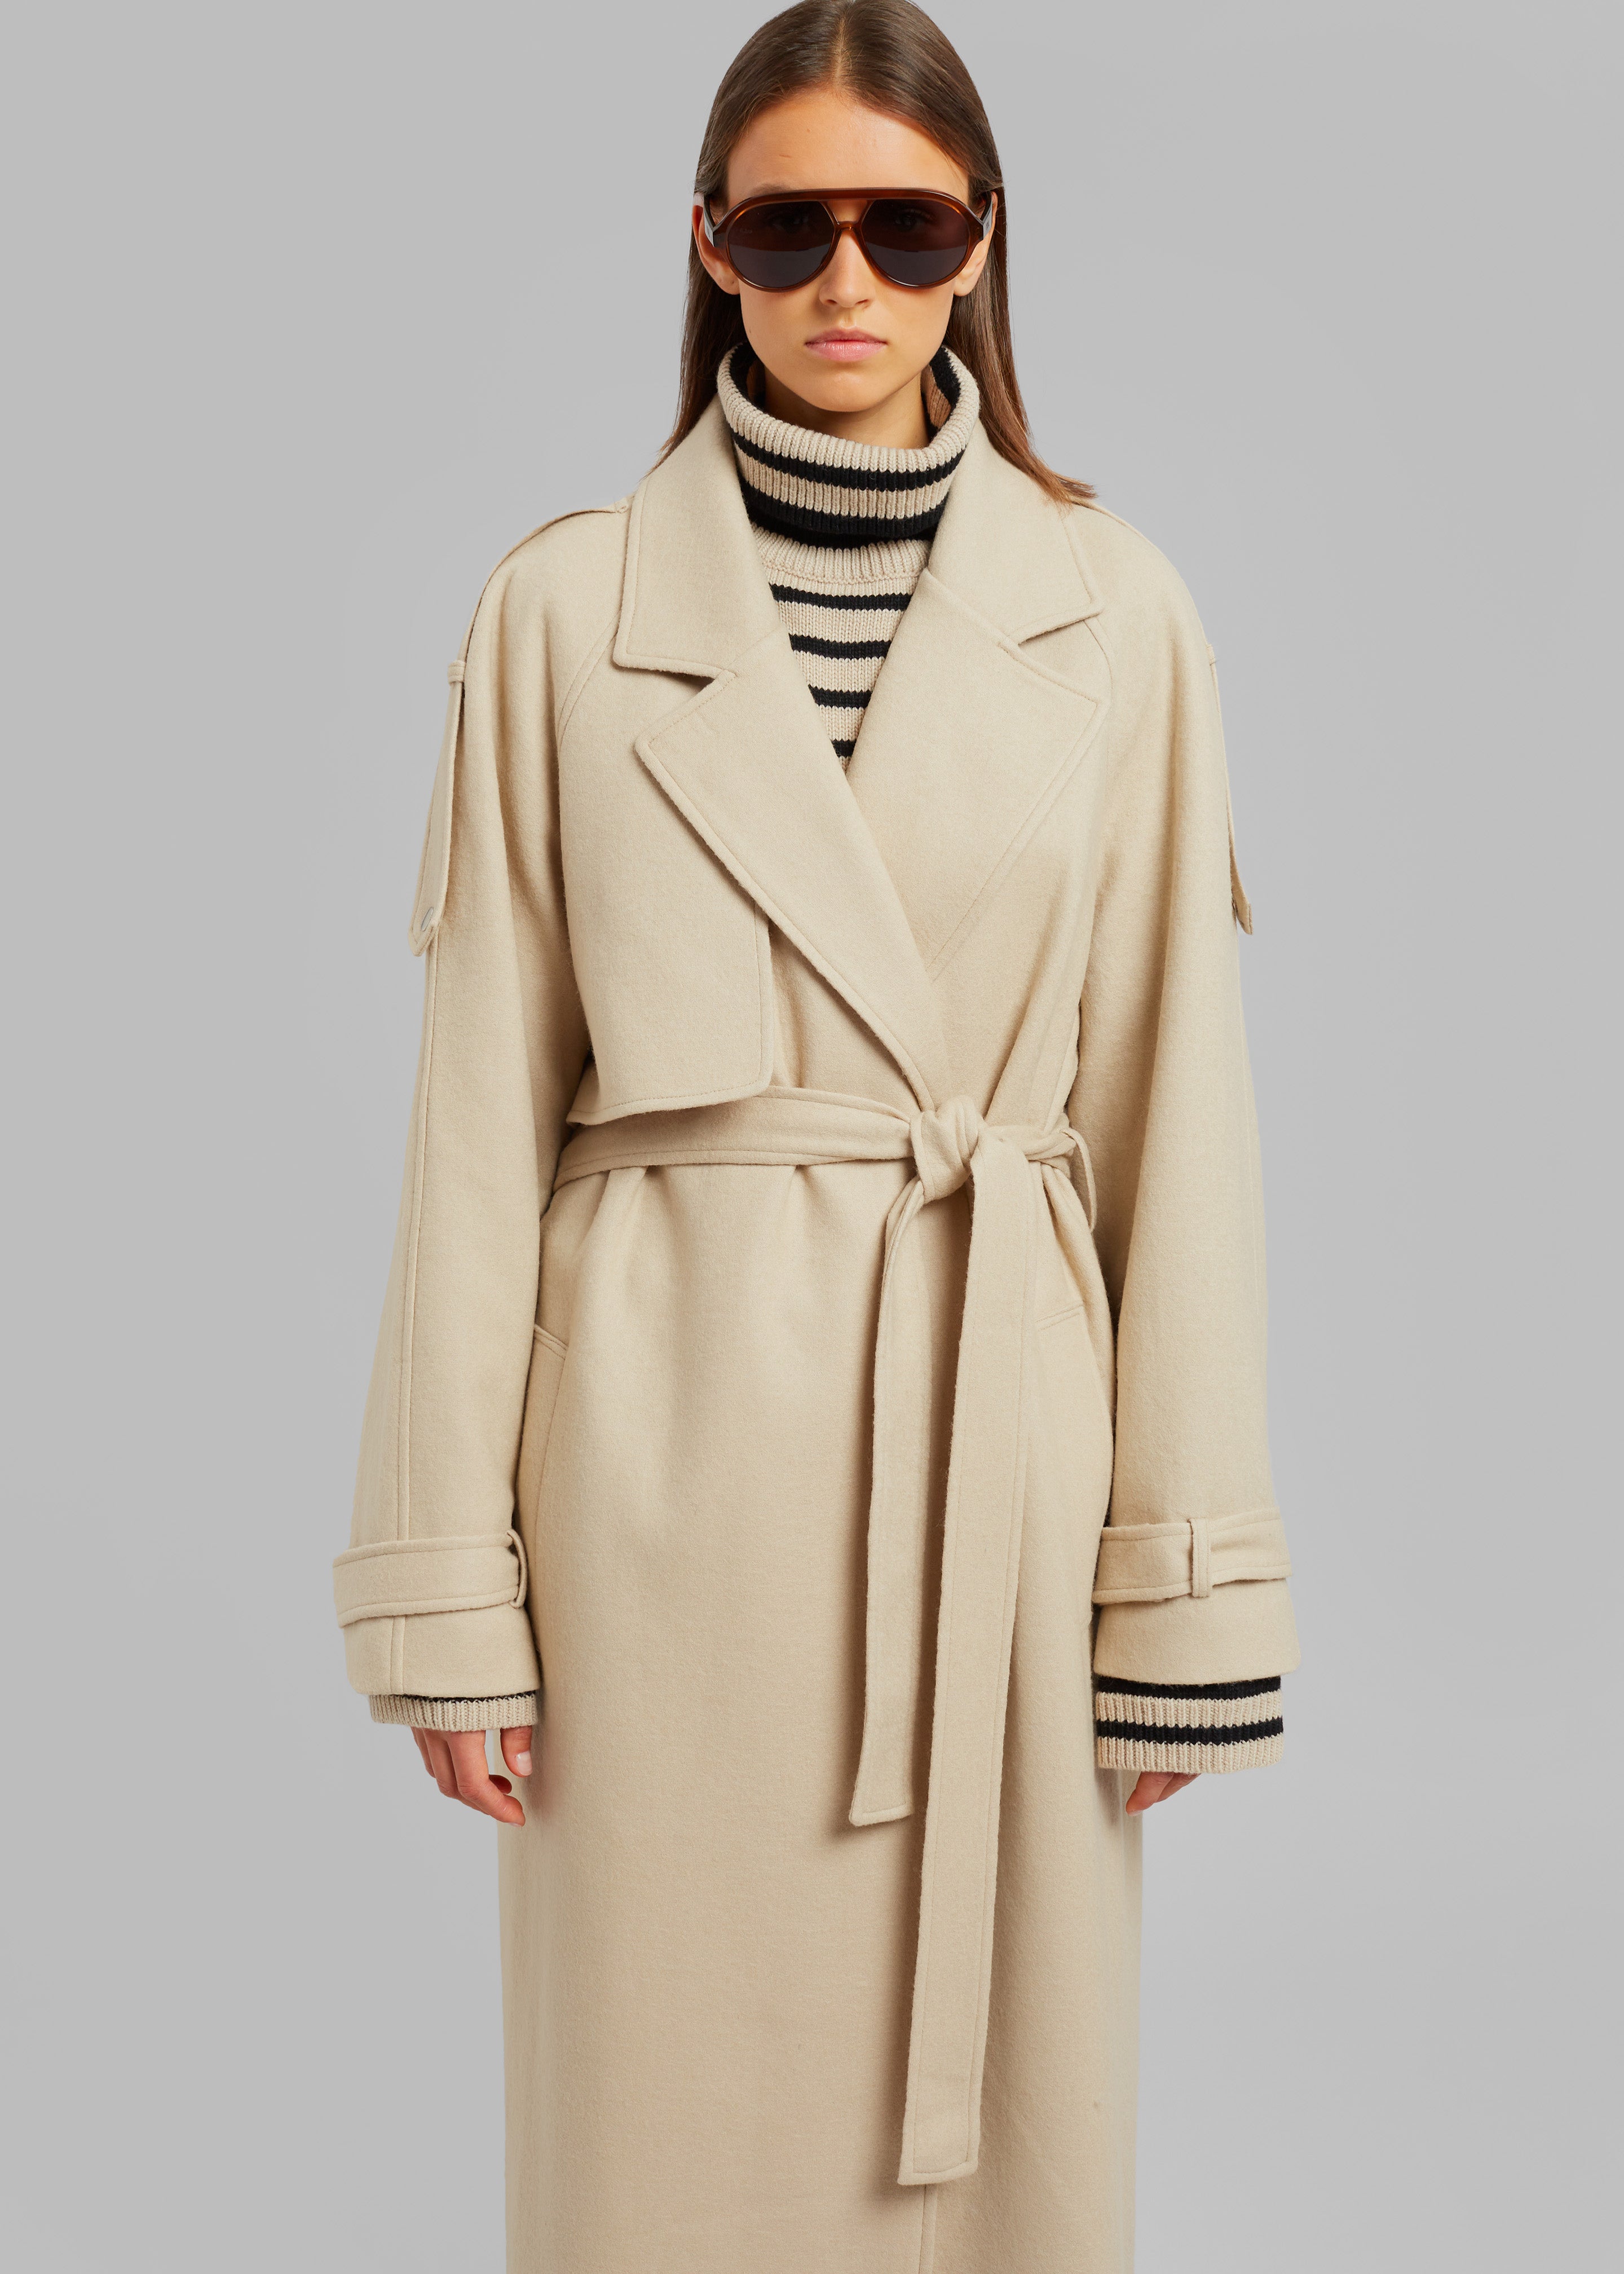 Suzanne Boiled Wool Trench Coat - Beige - 5